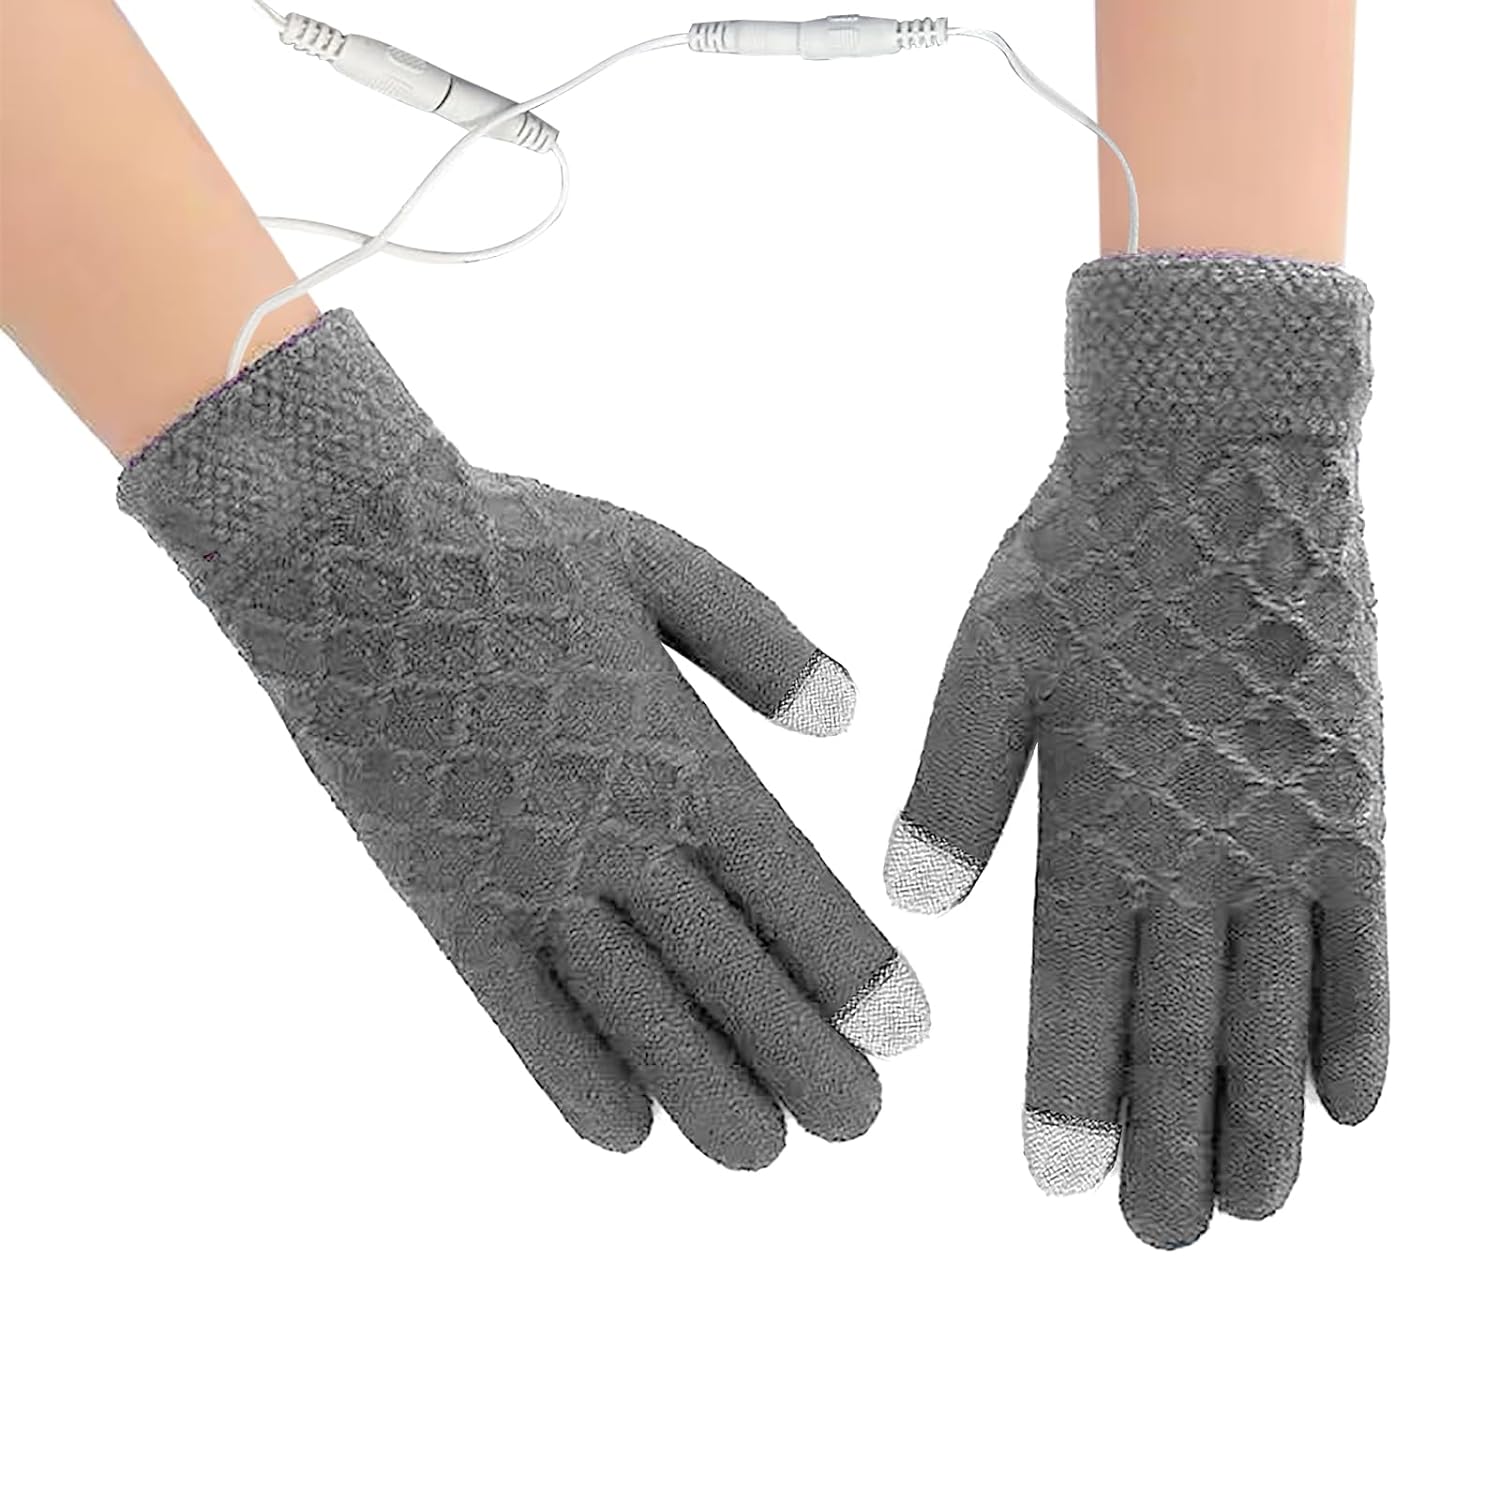 Womens USB Heated Winter Gloves Men Knitted Convertible Fingerless Gloves Electric Hand Warmer Fur Wool Thermal Cycling Mittens Half Finger Heating Work Texting Gloves Christmas Winter Gift